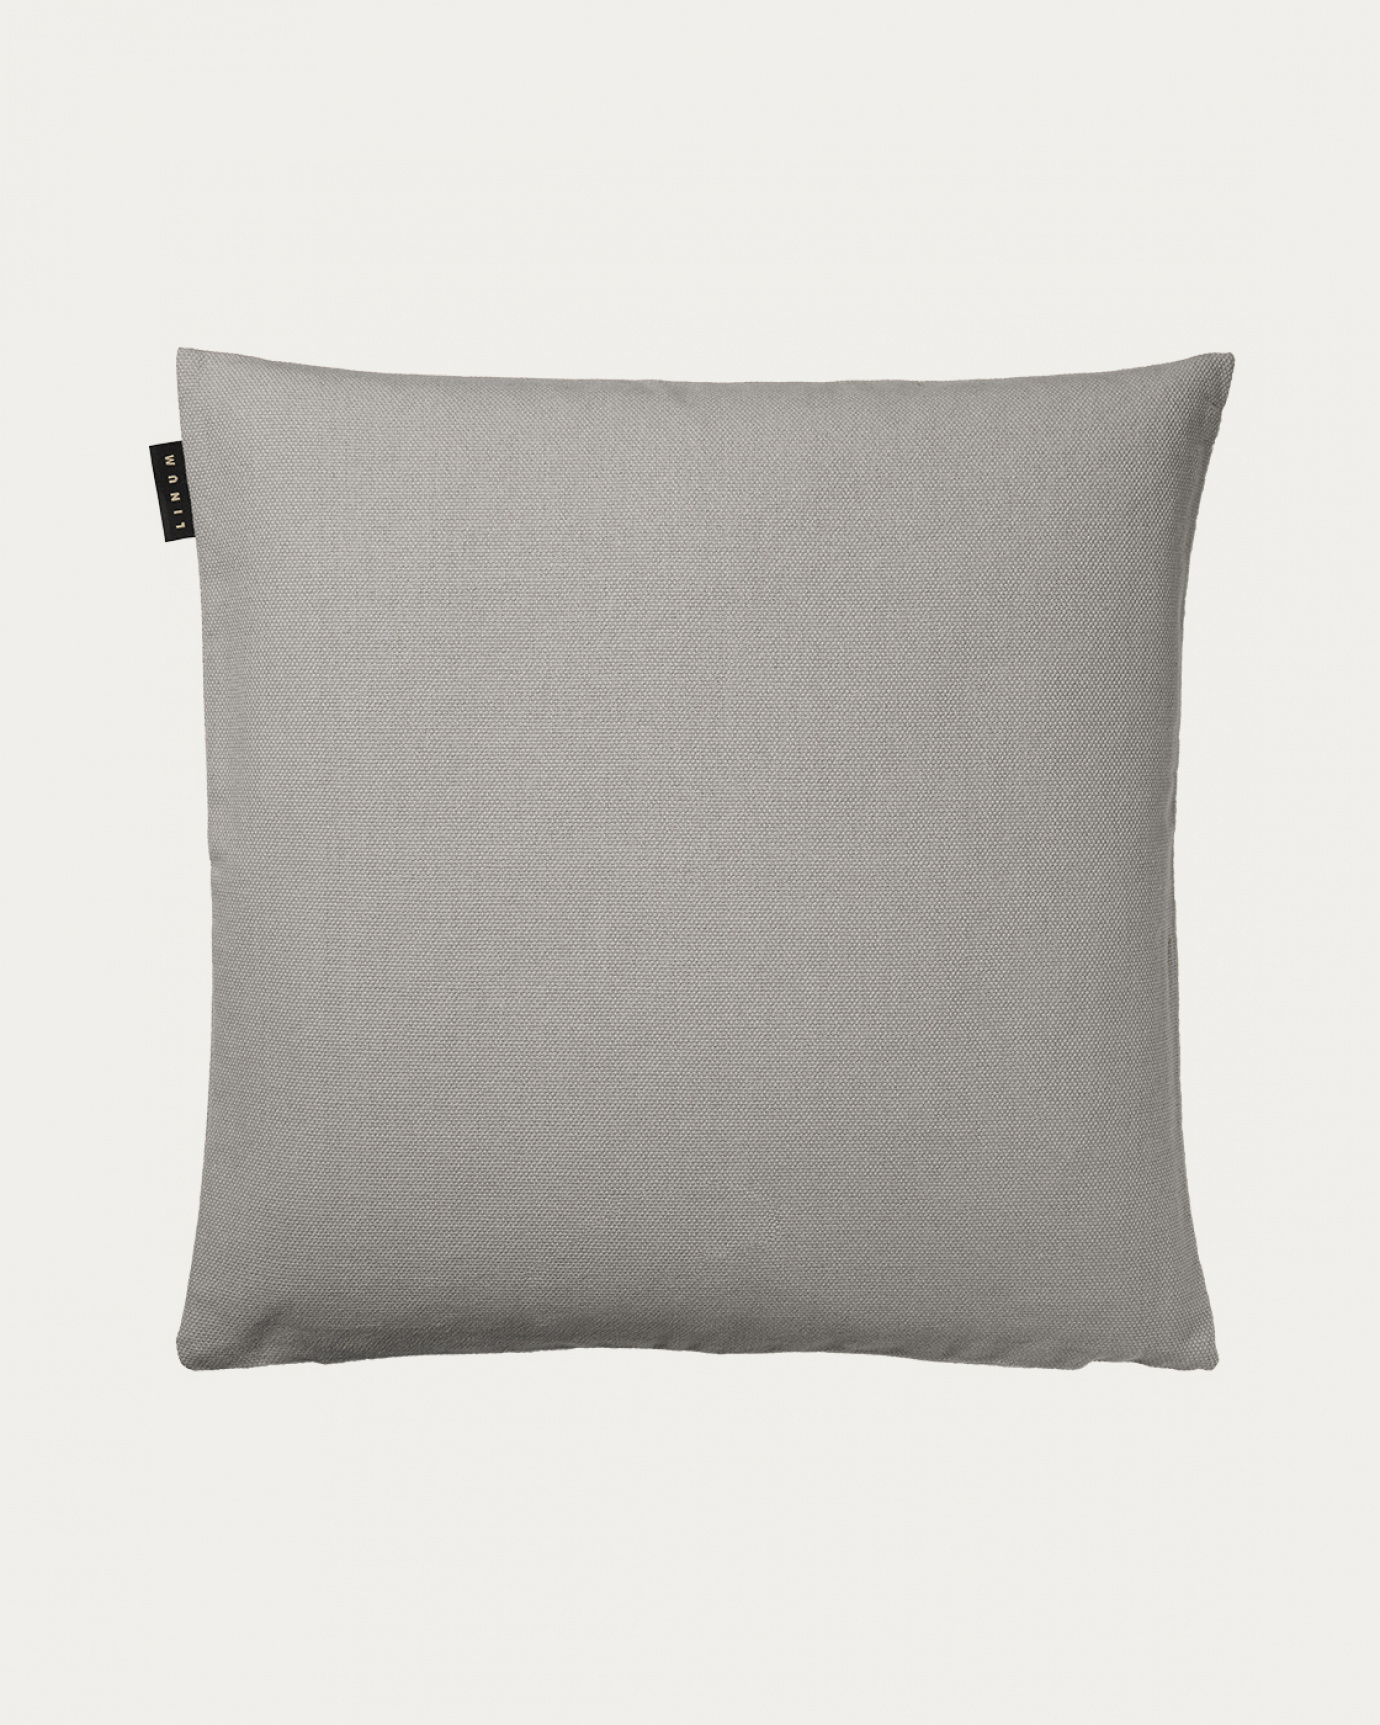 Product image light grey PEPPER cushion cover made of soft cotton from LINUM DESIGN. Easy to wash and durable for generations. Size 50x50 cm.